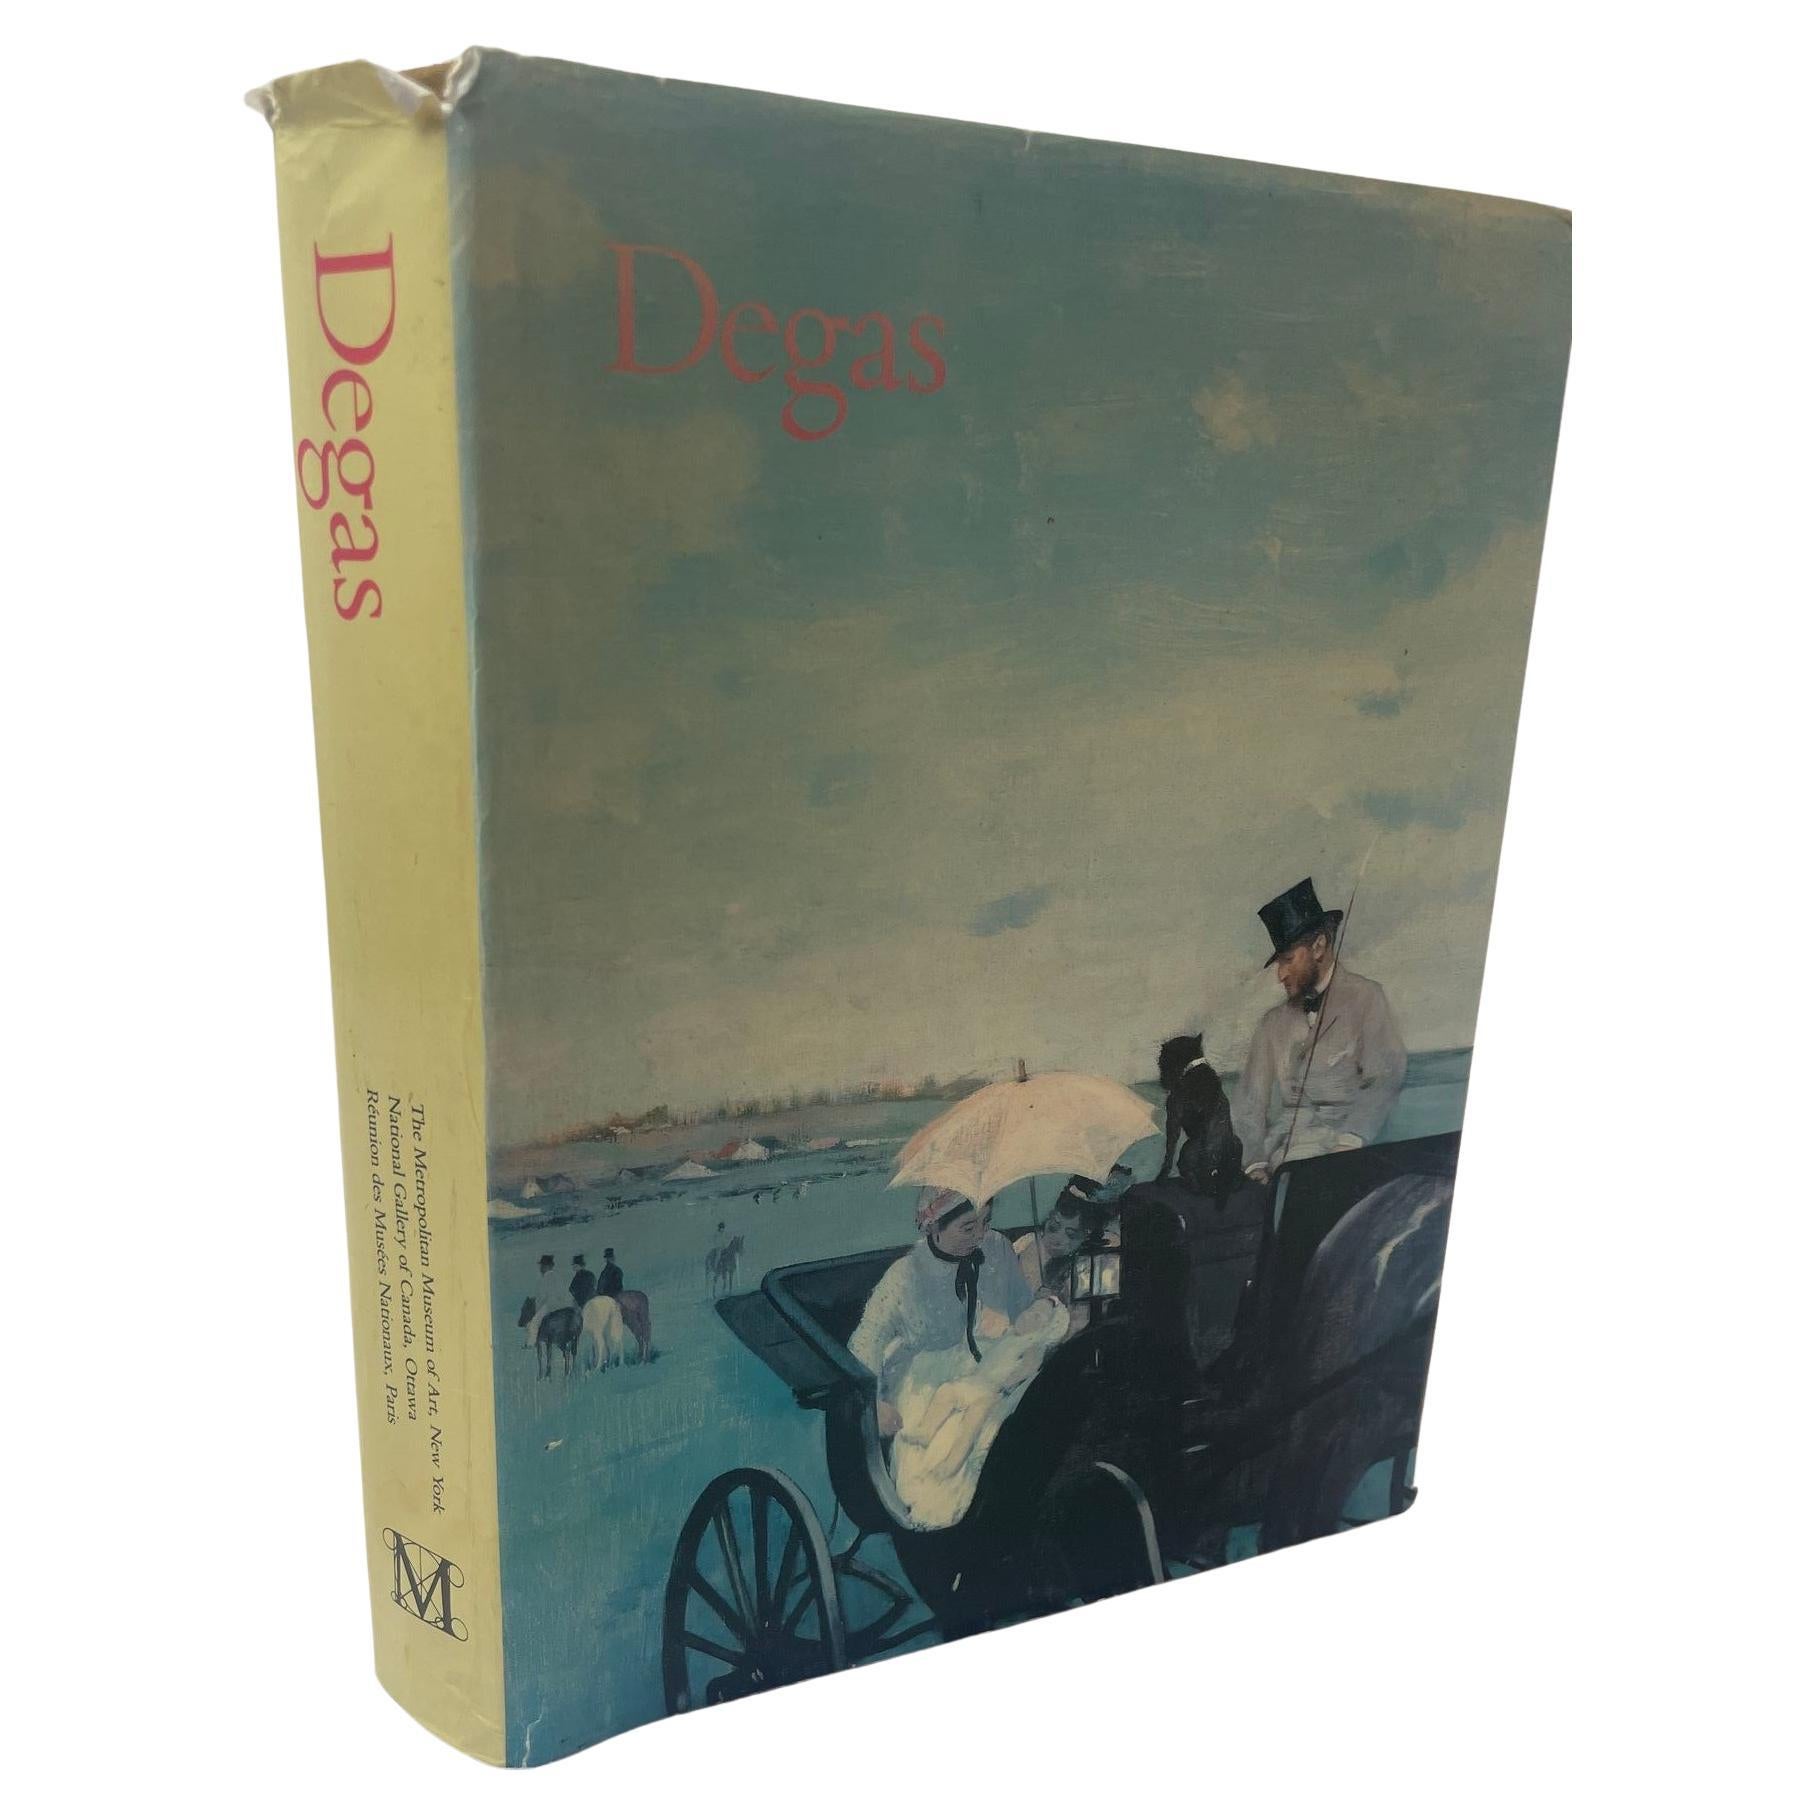 Degas by Jean Sutherland Boggs Hardcover Book Met Museum of Art 1st Ed. 1988 For Sale